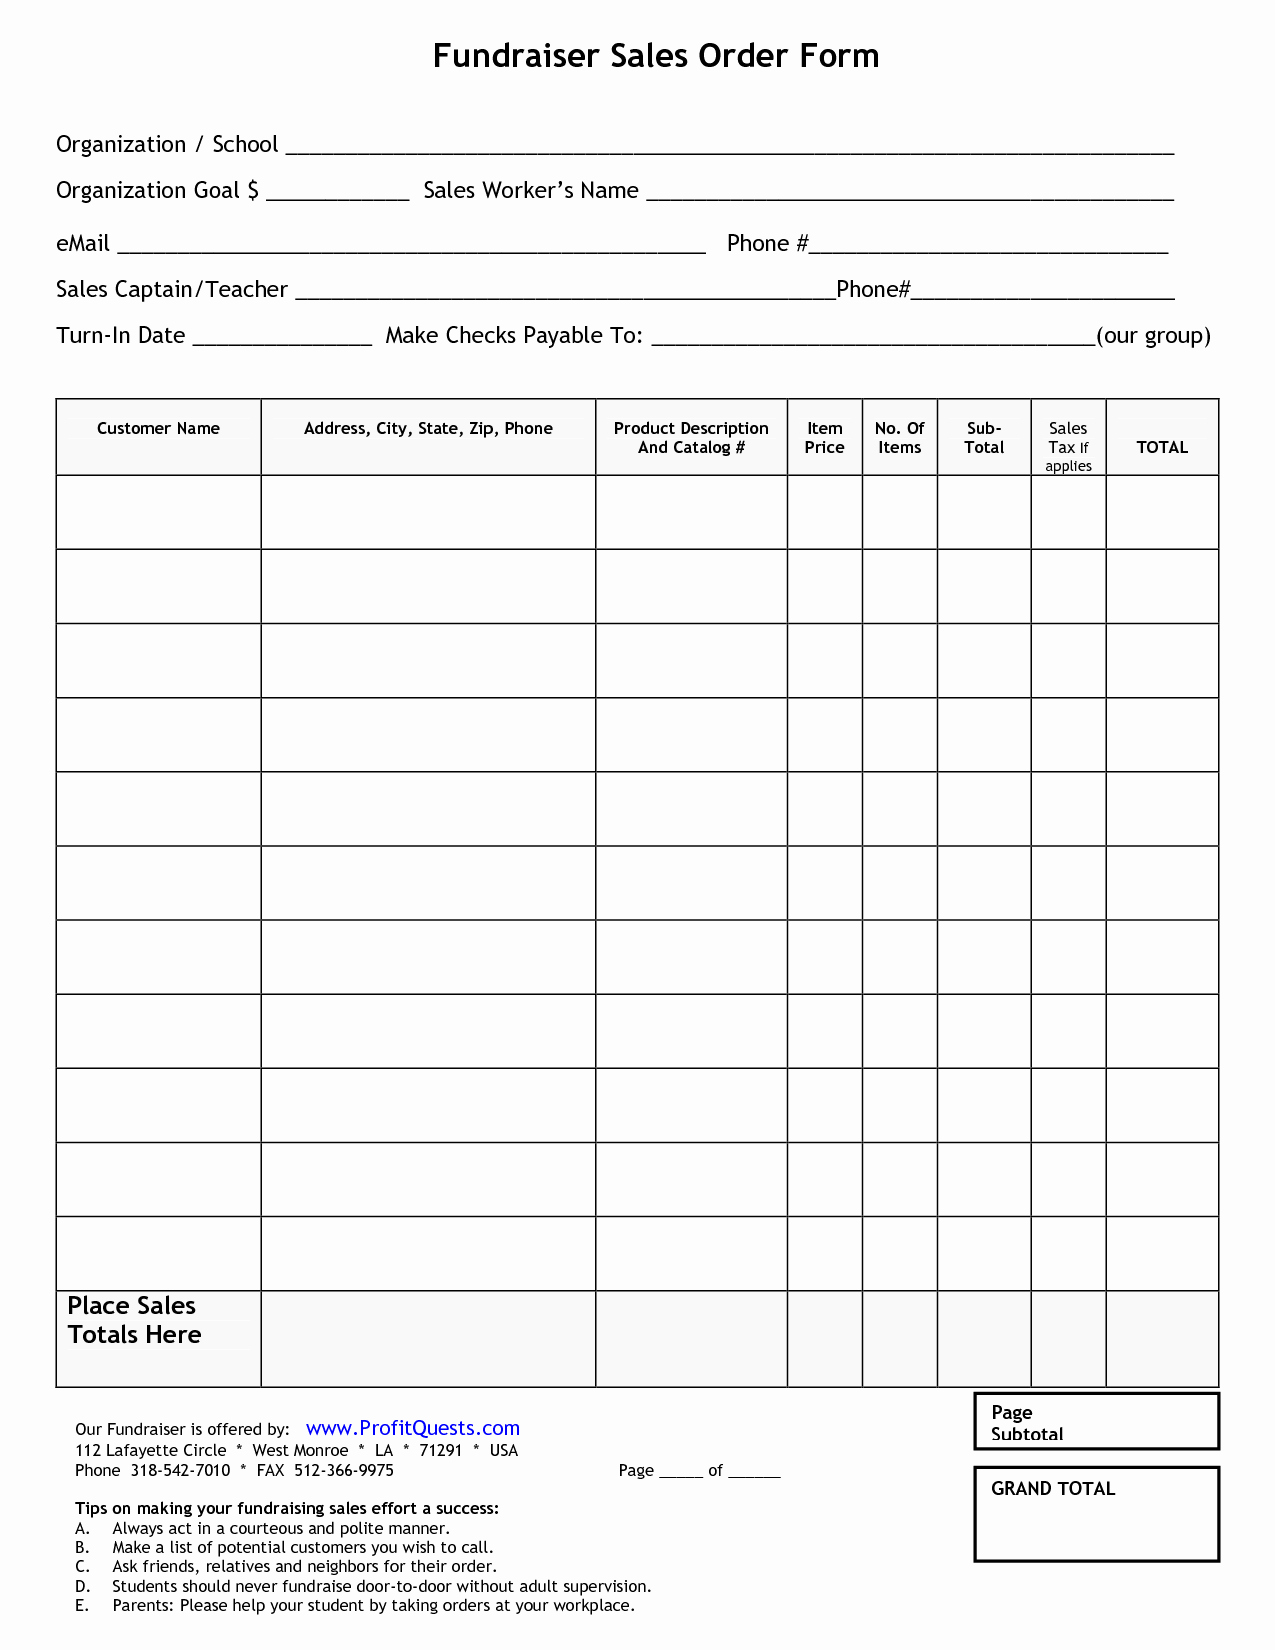 Sales order form Template Free Beautiful Fundraiser order form